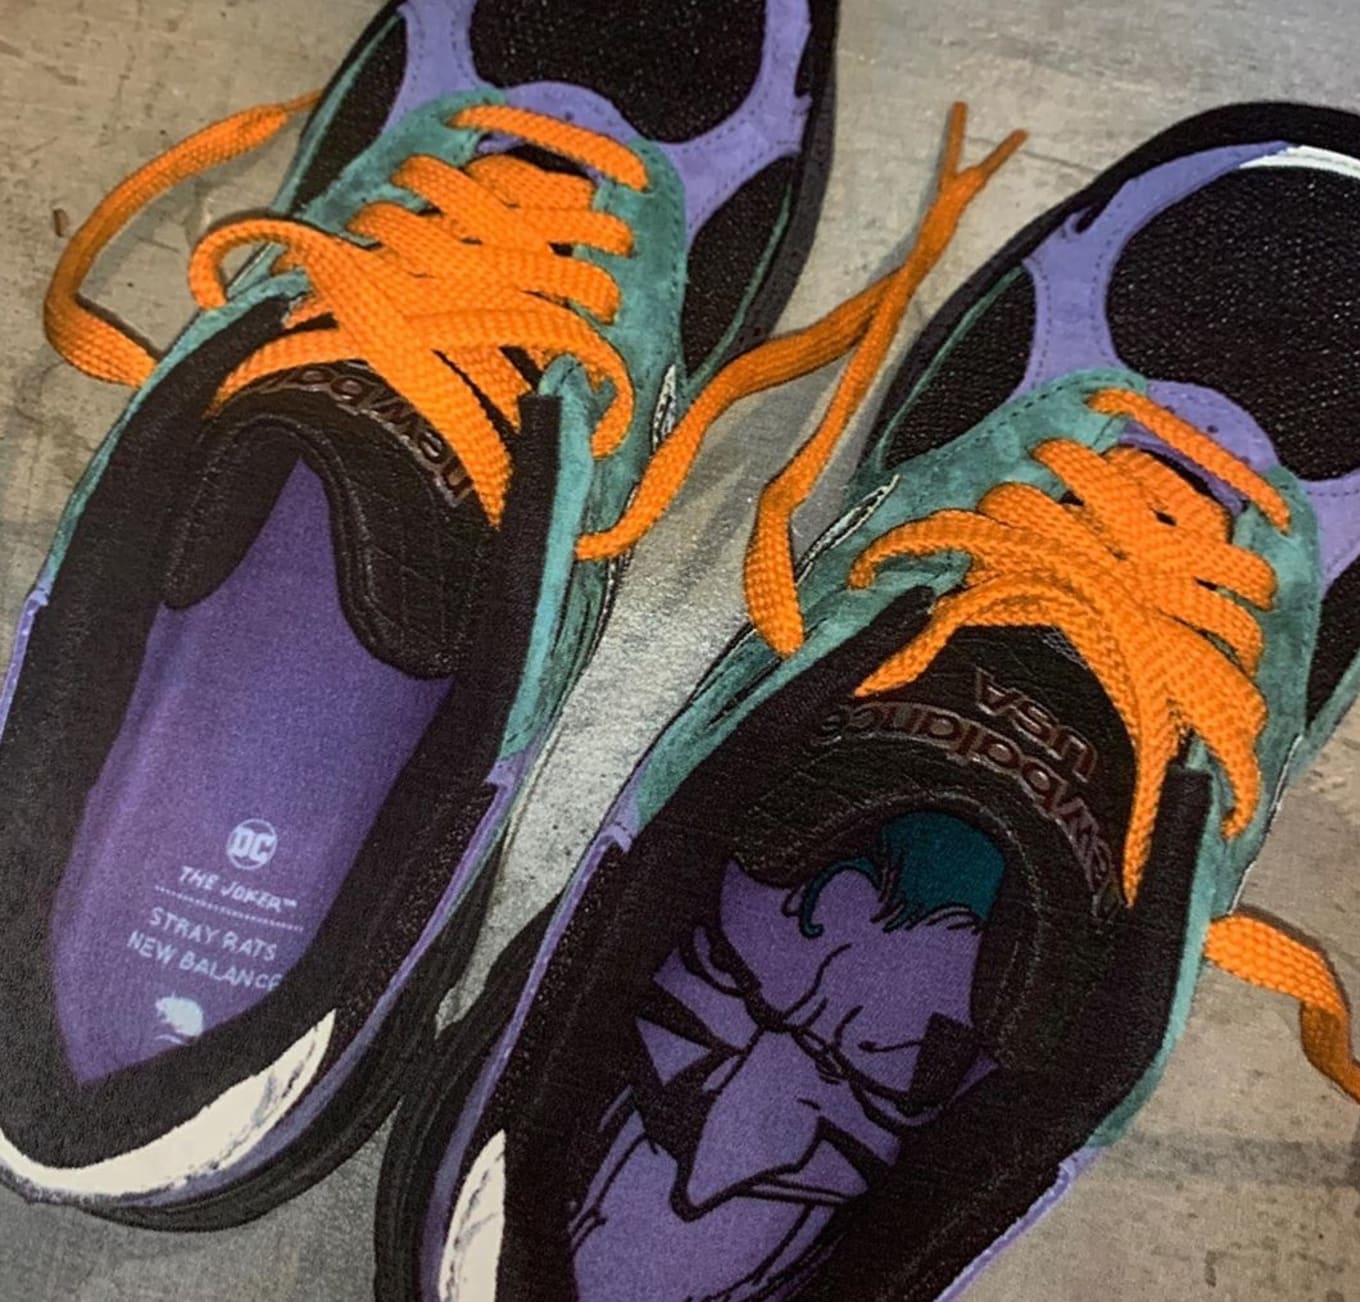 The Joker x Stray Rats x New Blanace 990v3 Release Date | Sole Collector